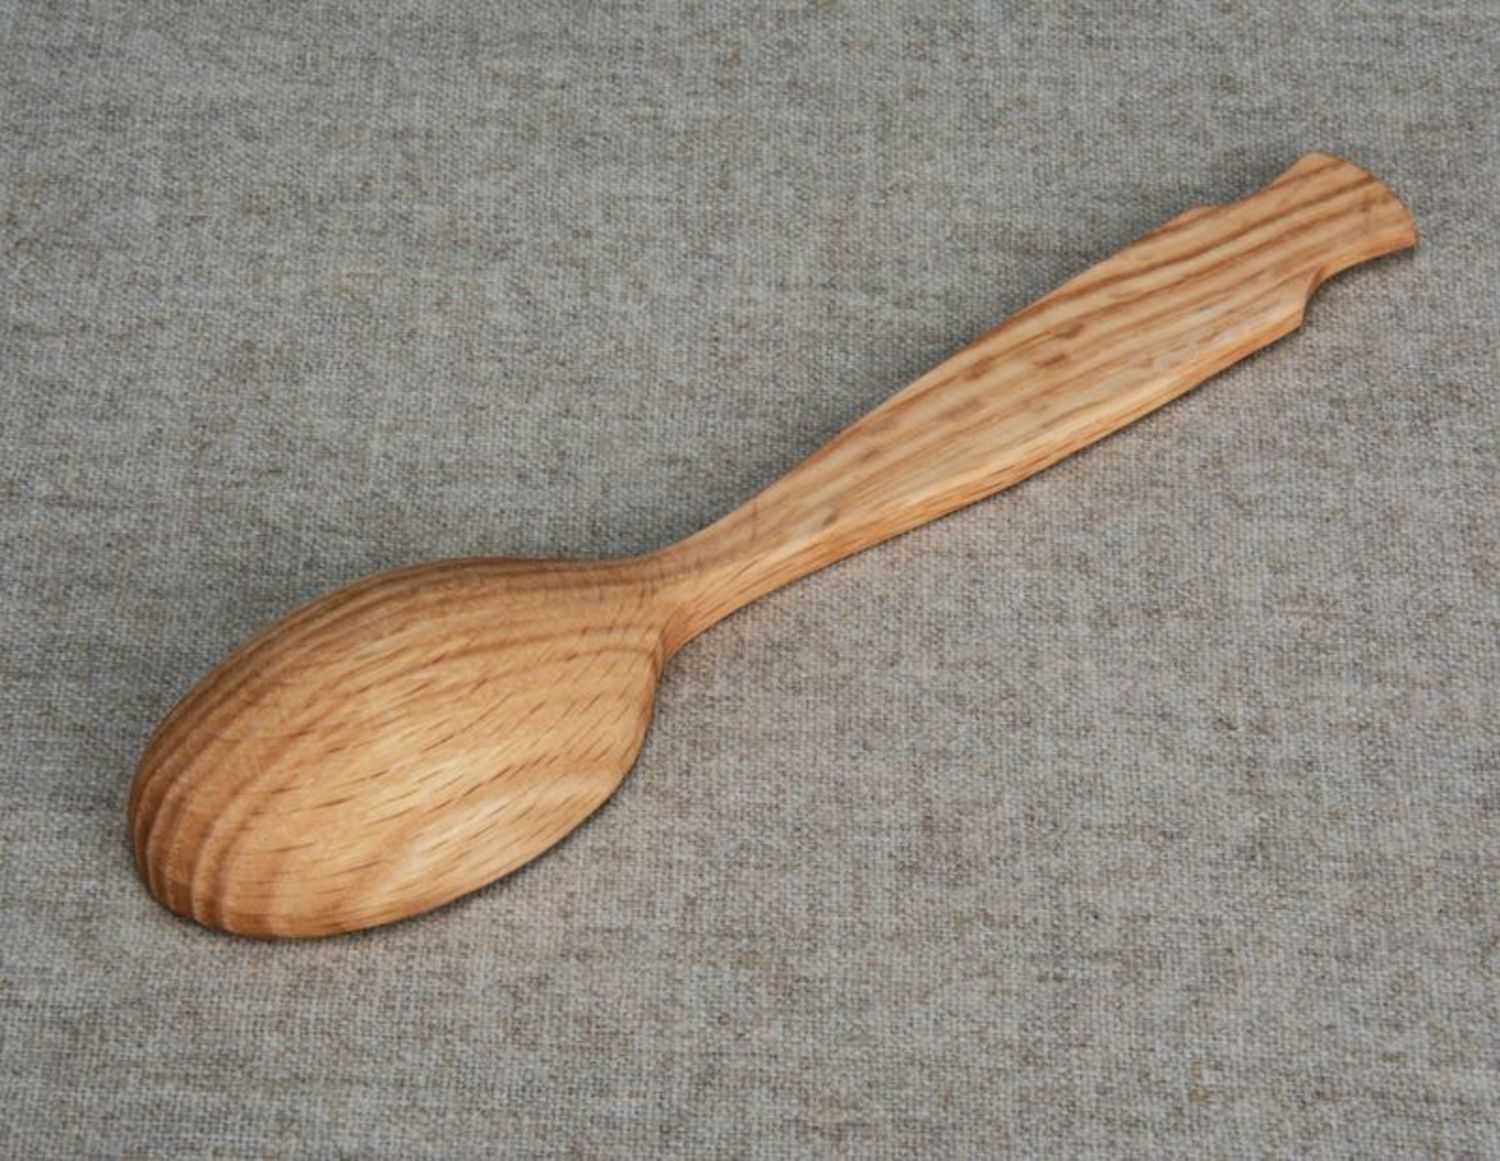 Handmade wooden spoon eco friendly tableware large wooden spoon kitchen decor photo 3